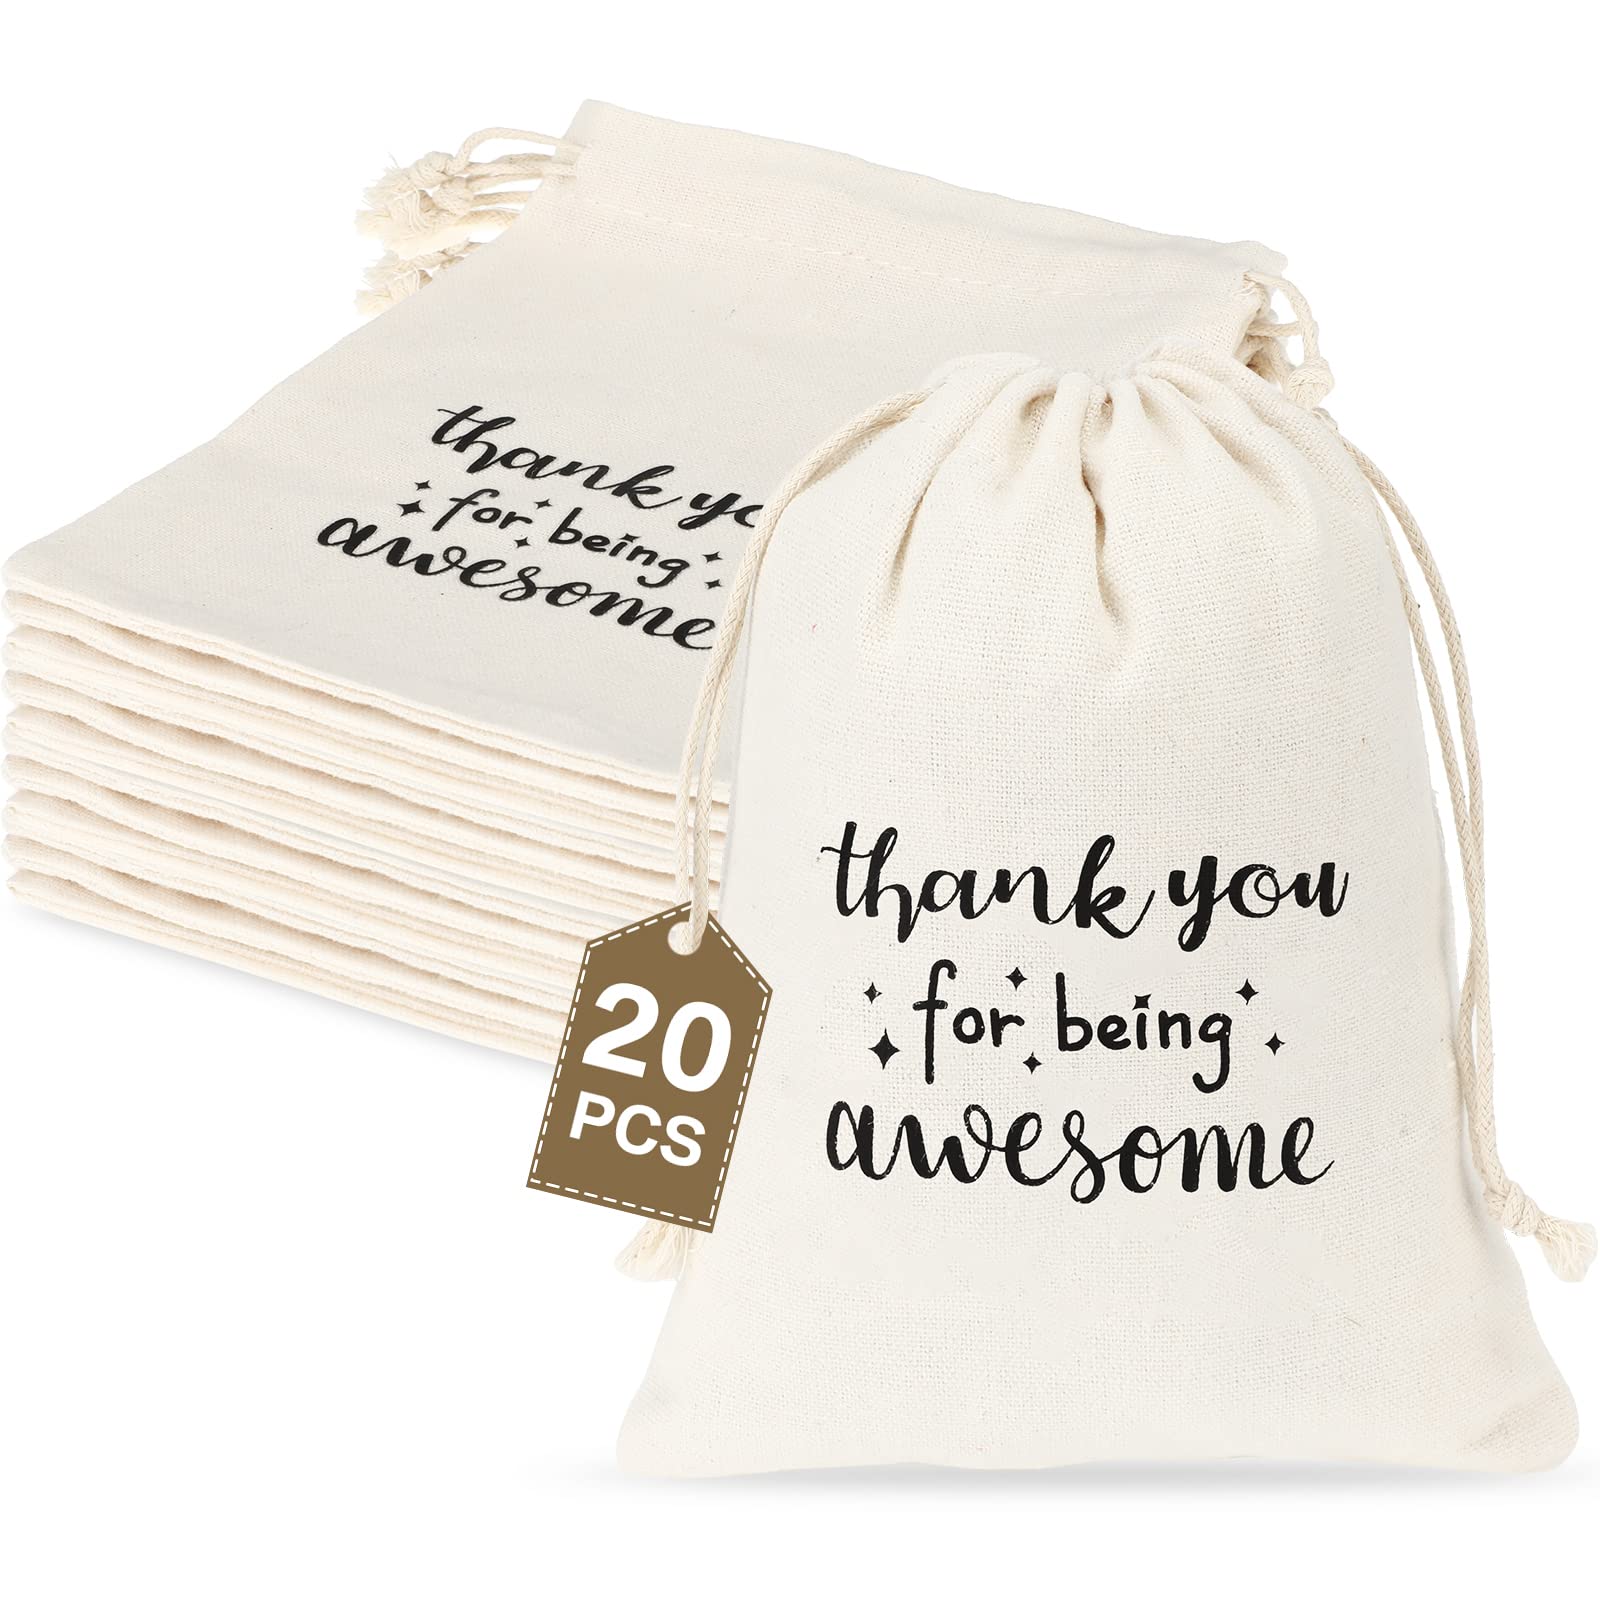 Fumete 20 Pcs Gift Drawstring Bags for Employee Coworker Colleague, Thank You for Being Awesome Bags, Thank You Drawstring Gift Bags Lovely Bag for Thanksgiving Christmas(White & Black, 5 x 7 Inch)